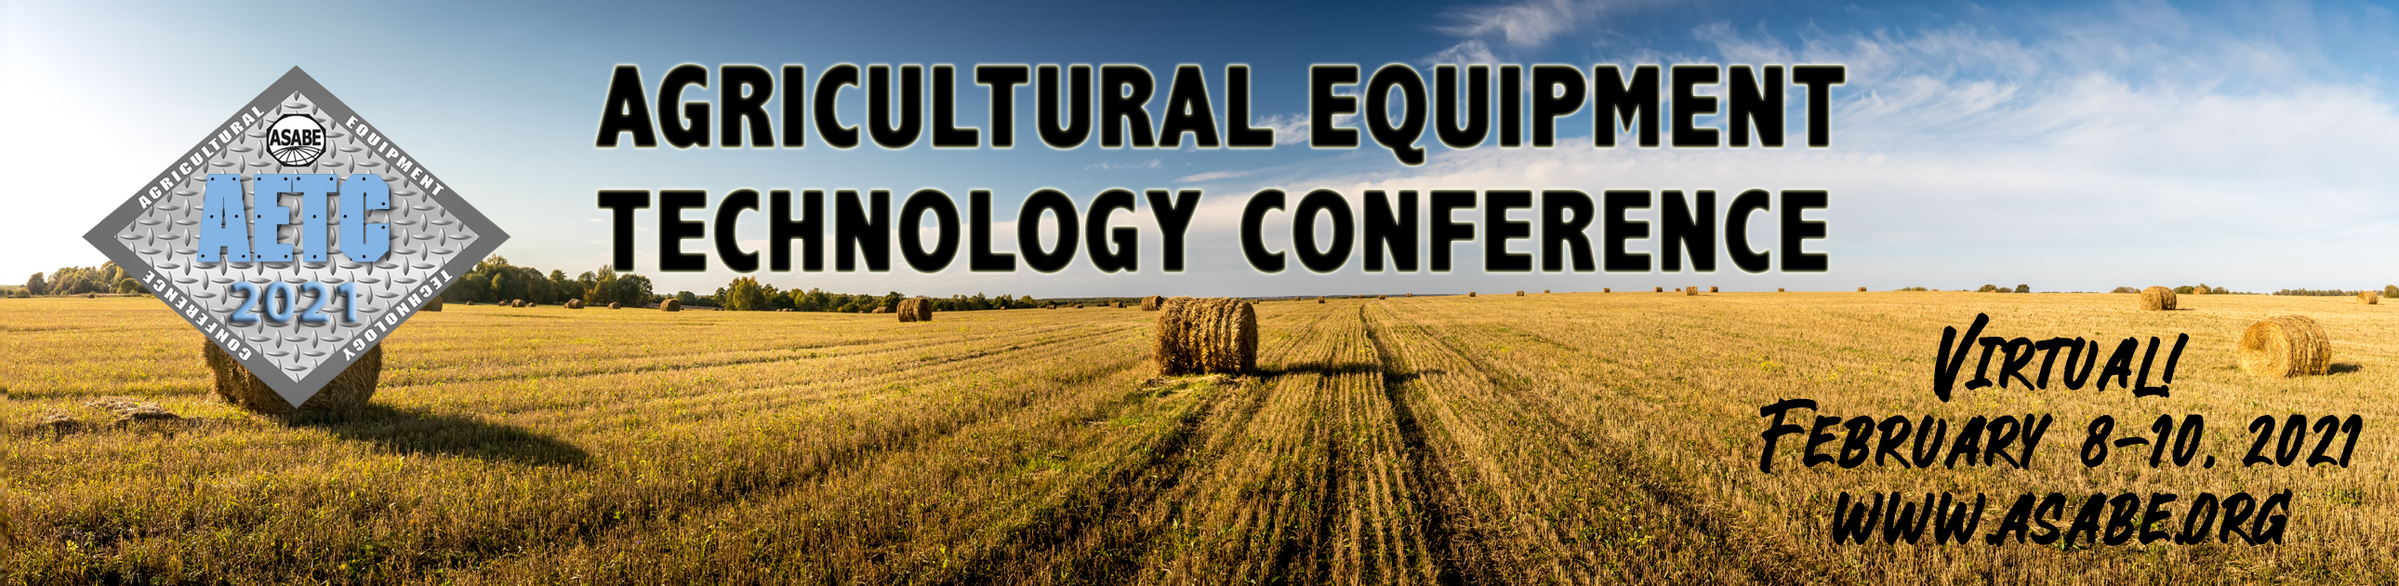 2021 Agricultural Equipment Technology Conference 